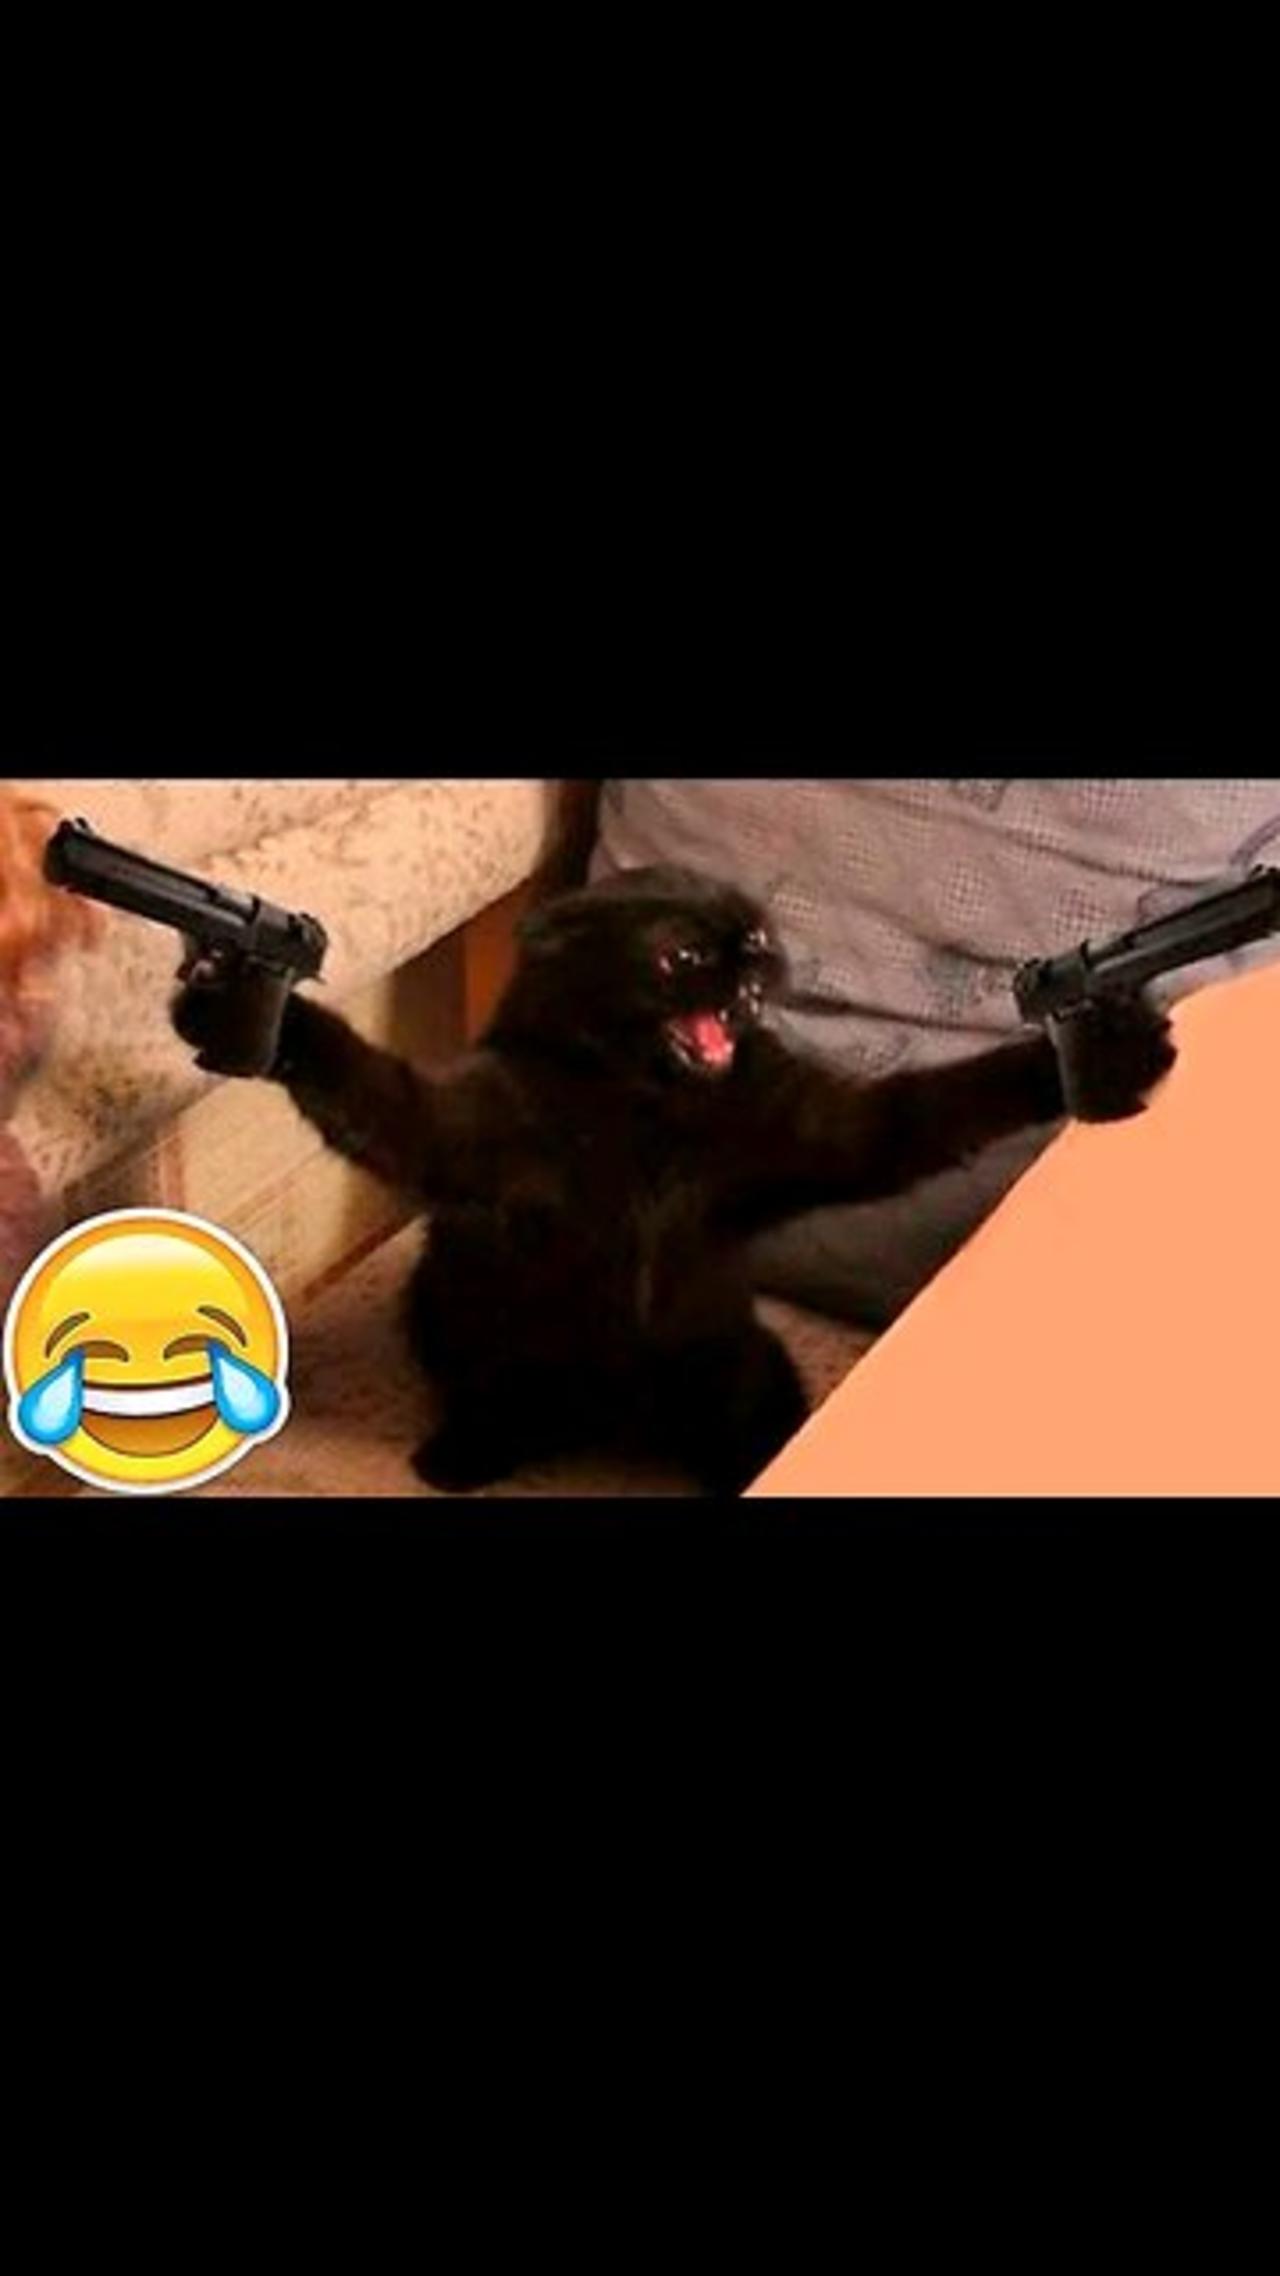 Funny Animal Videos Of The Day ! 😂😂 #dogsmemes #memedaily #dankmemes  Please follow me